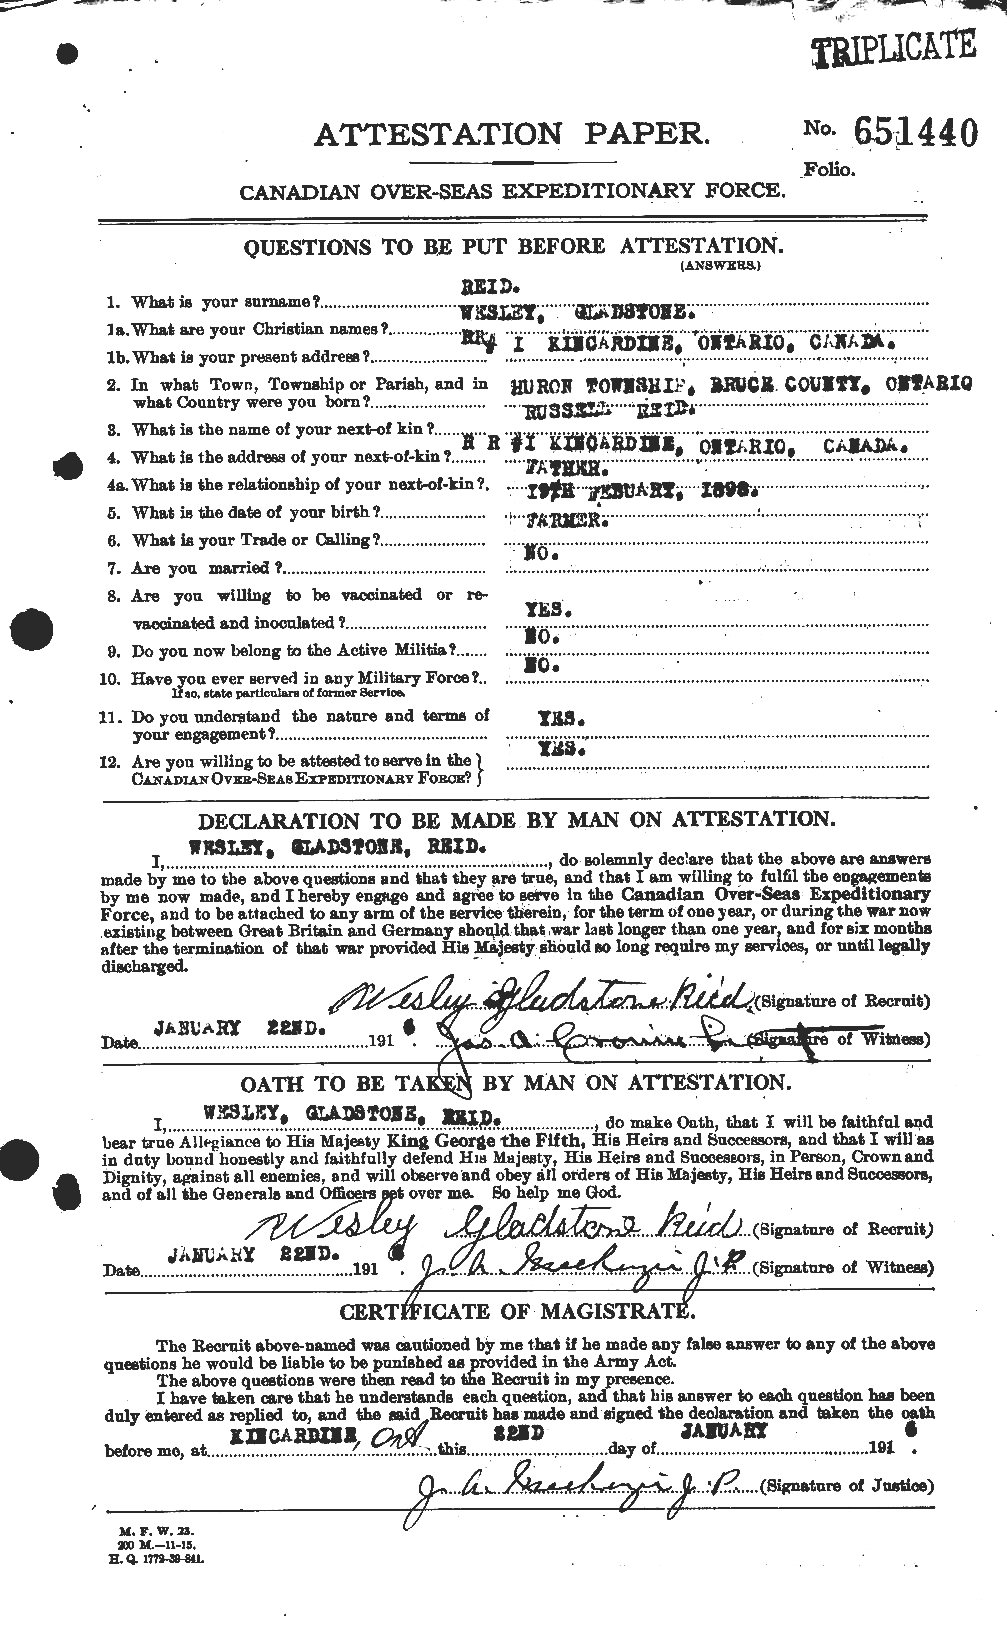 Personnel Records of the First World War - CEF 596897a